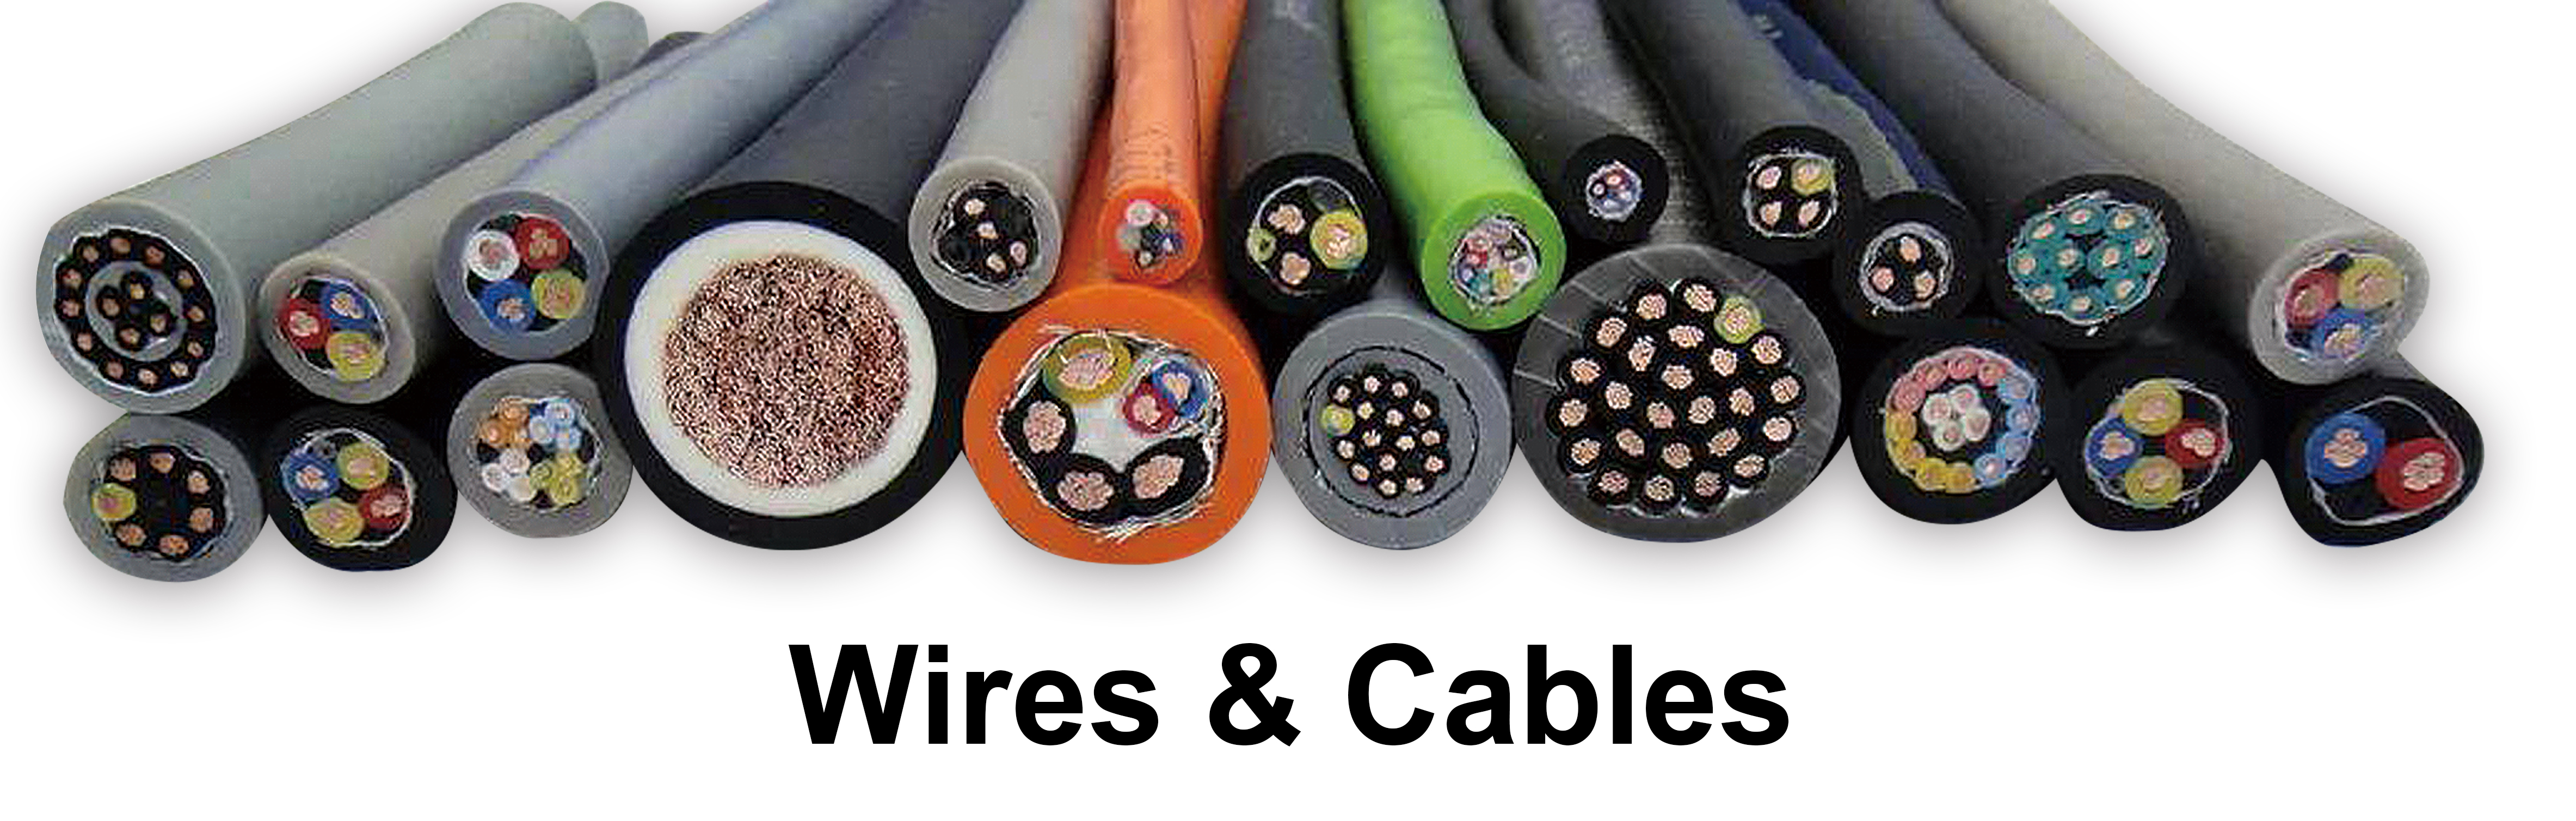 wire cables